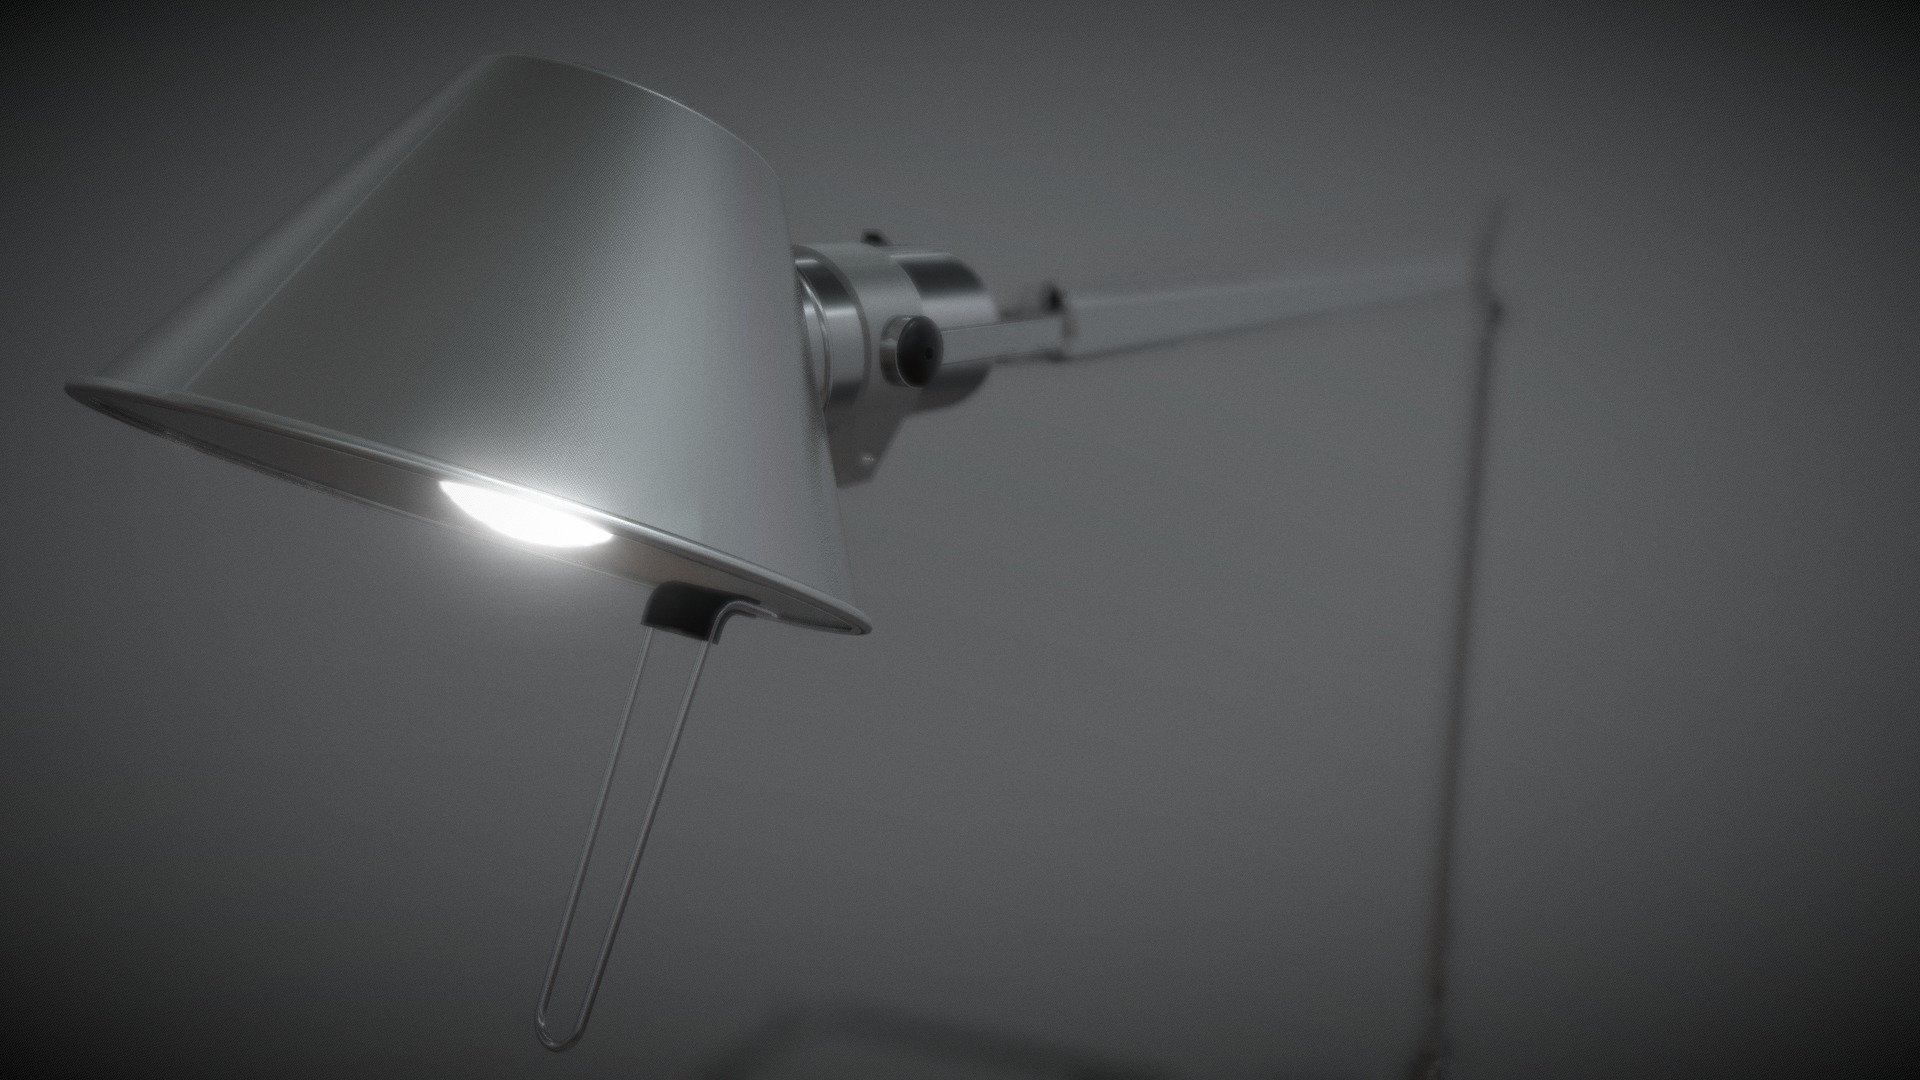 3D model Tolomeo Lamp - This is a 3D model of the Tolomeo Lamp. The 3D model is about a ceiling fan with a light.